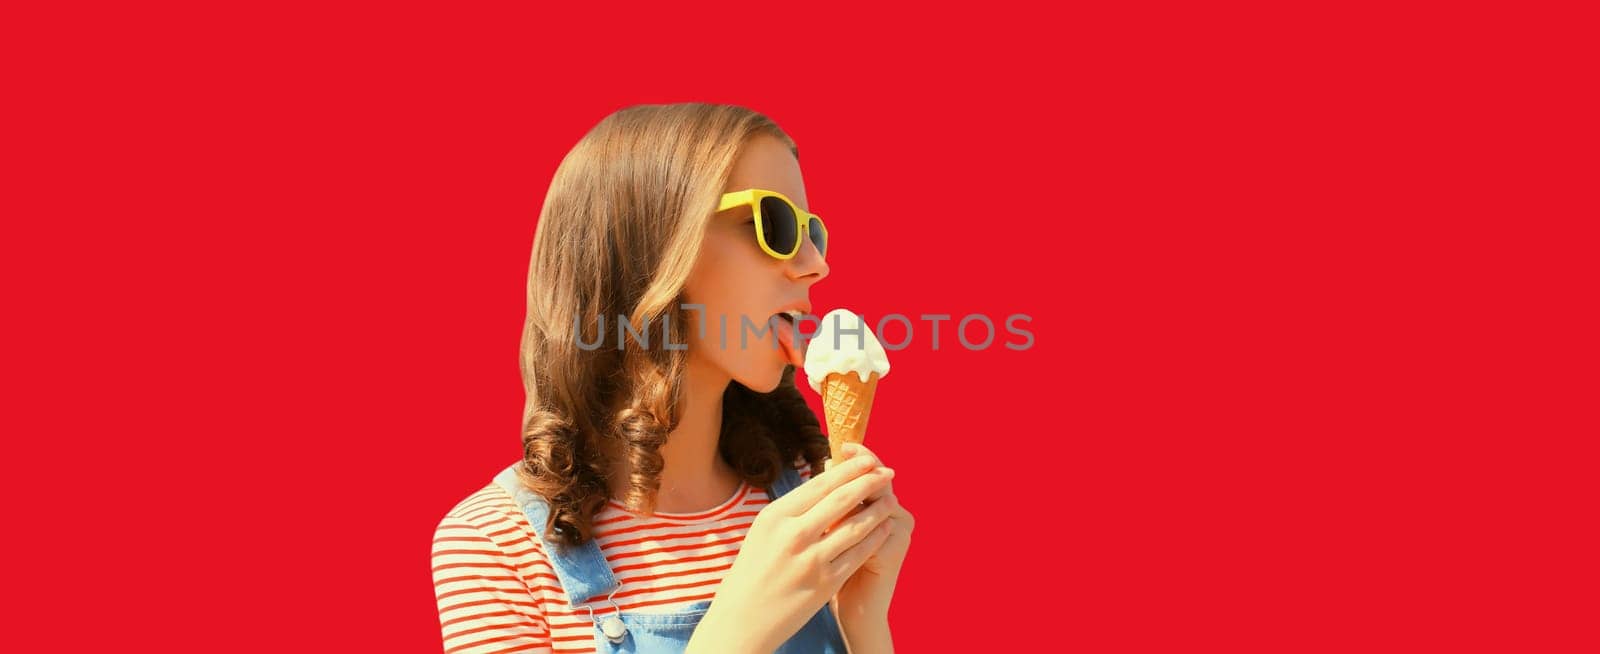 Summer portrait of happy young woman eating ice cream wearing sunglasses on red studio background by Rohappy